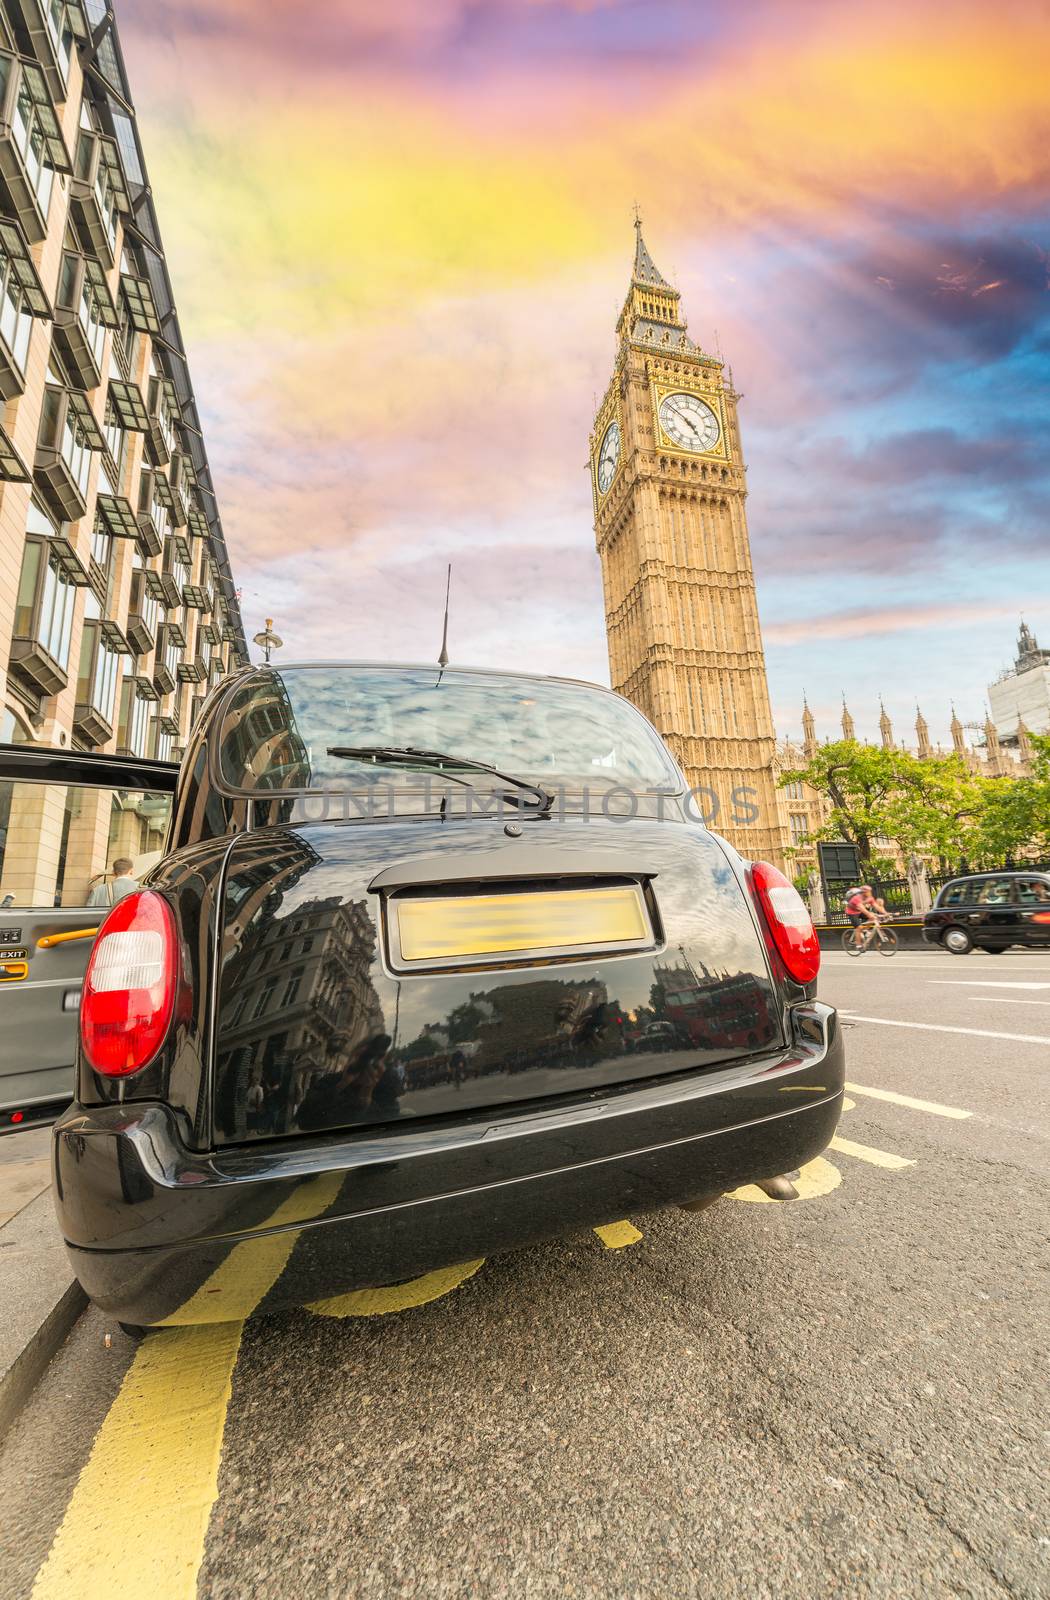 Black London cab under Big Ben tower and Westminster Palace by jovannig